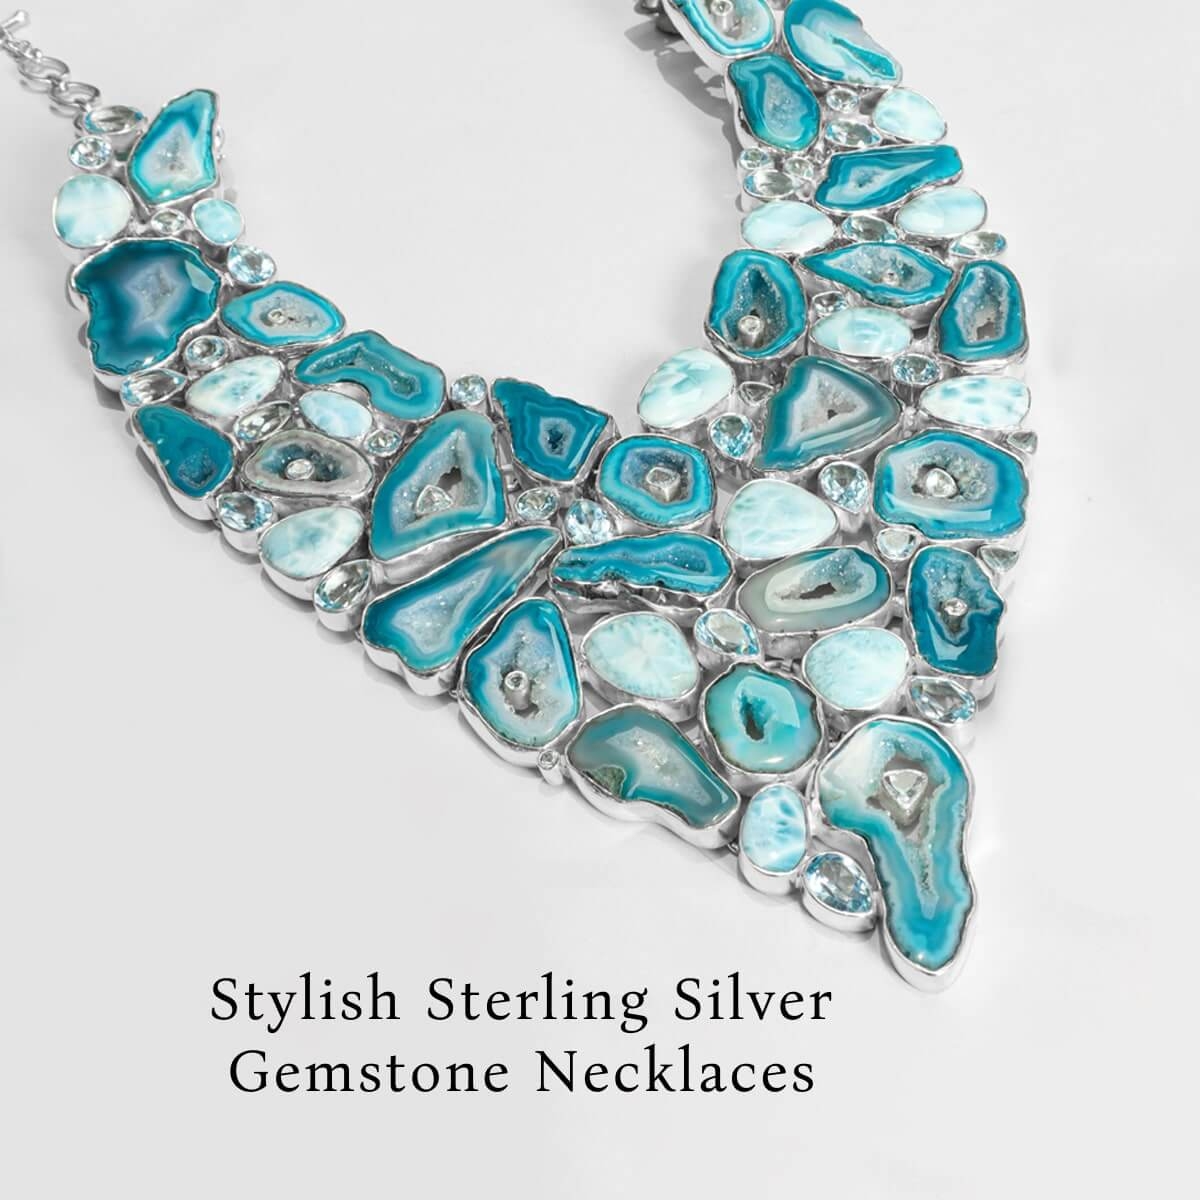 Style Sterling Silver Gemstone Necklace